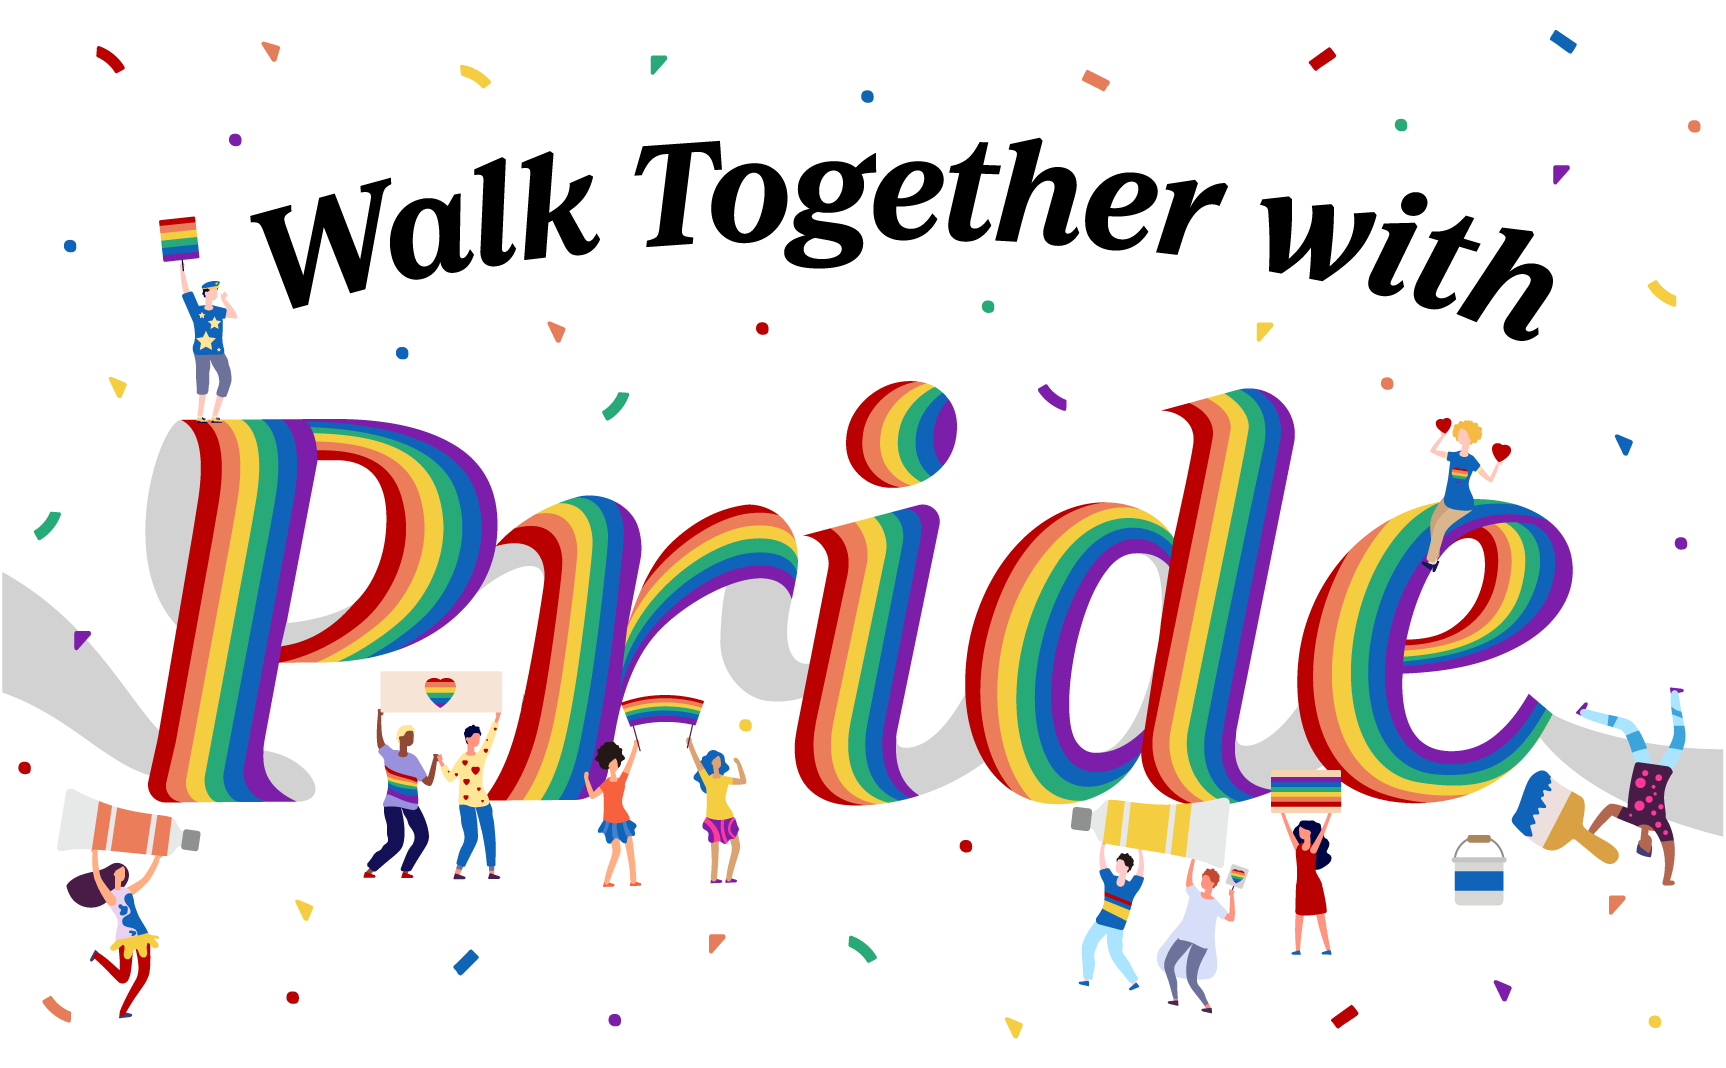 Walk Together with Pride